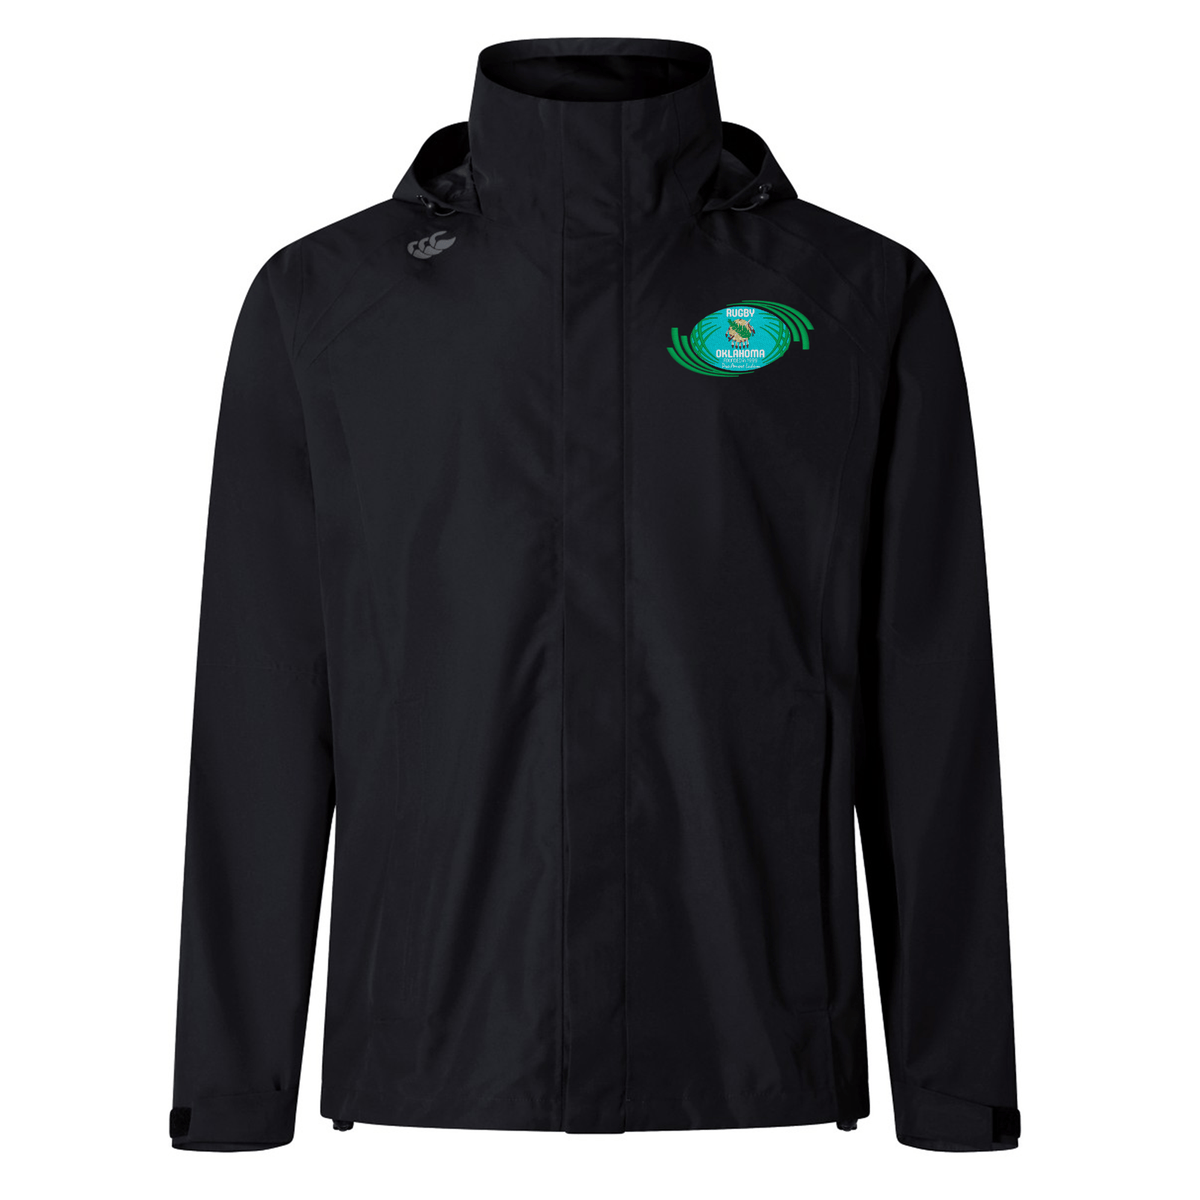 Rugby Oklahoma Elite Storm Jacket by Canterbury - World Rugby Shop